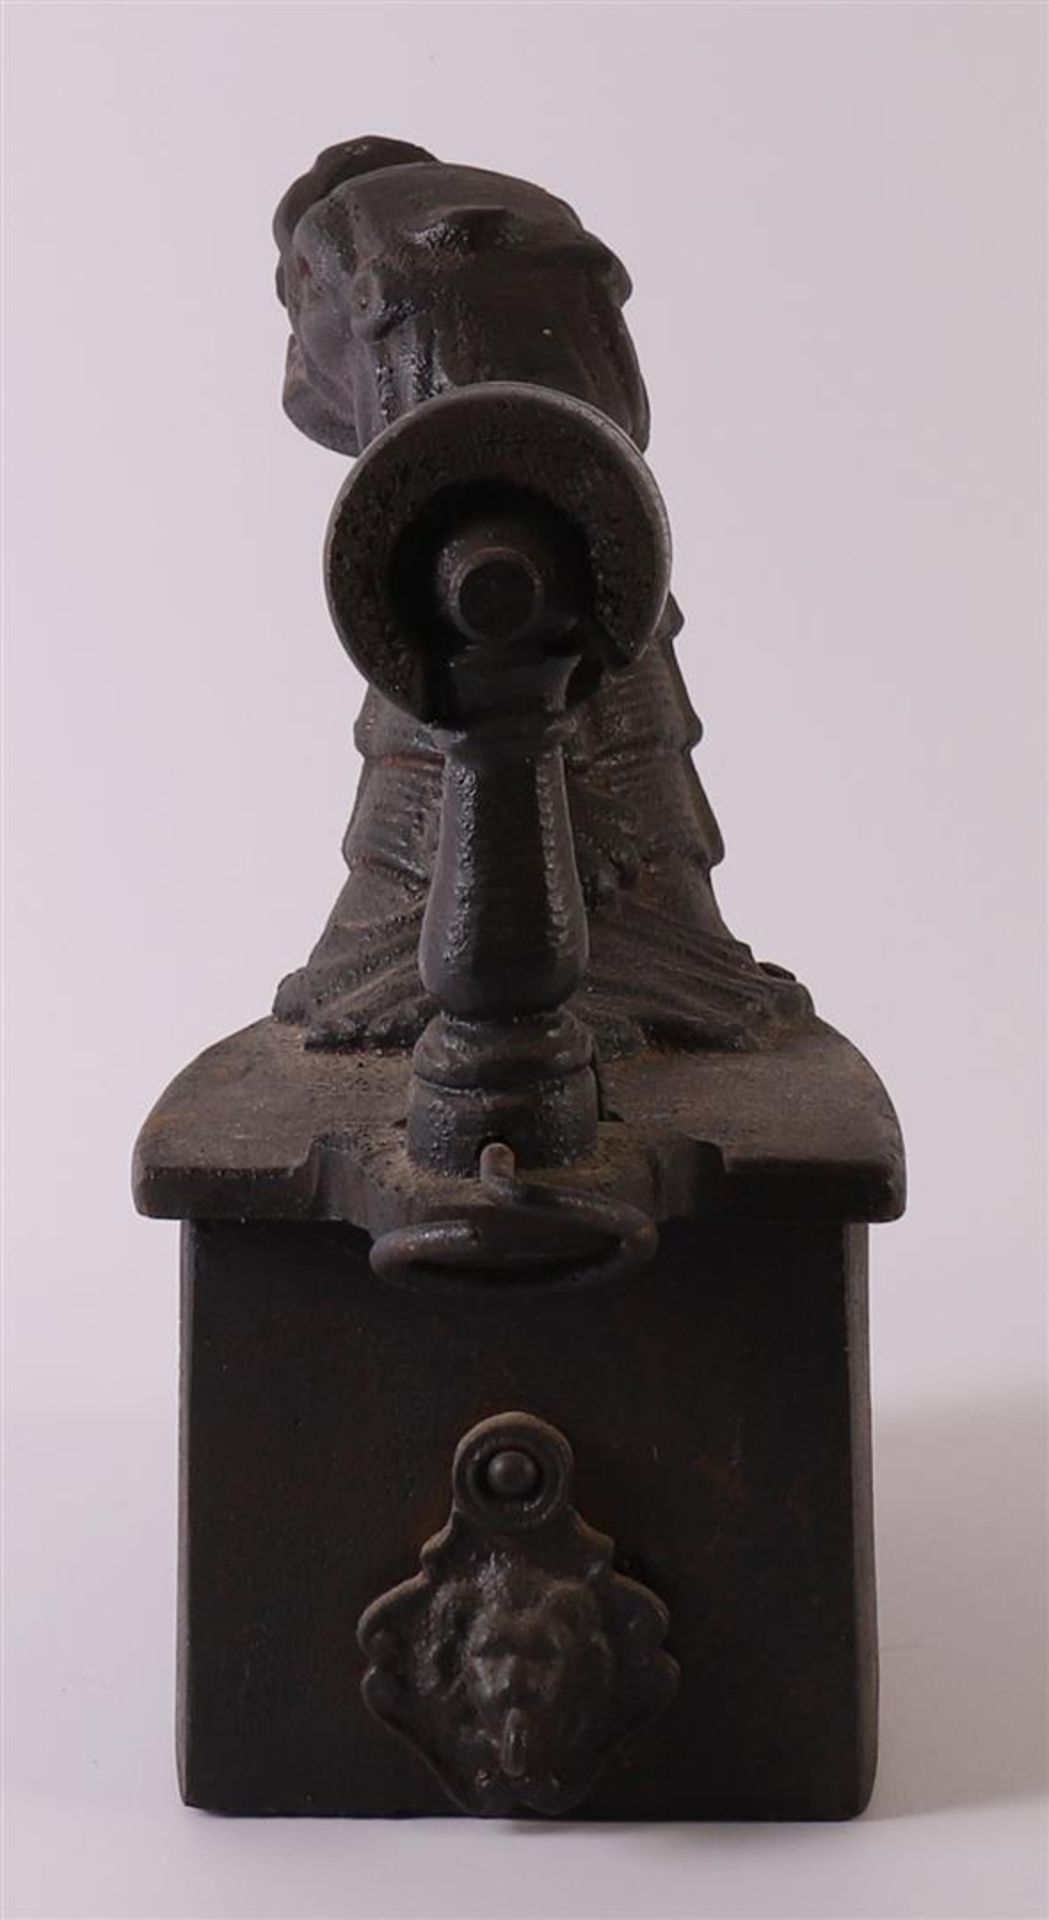 A bronze pan on tripod, 18th century, h 10 x Ø 24 cm (without stem). Here is a cast iron coal - Image 7 of 7